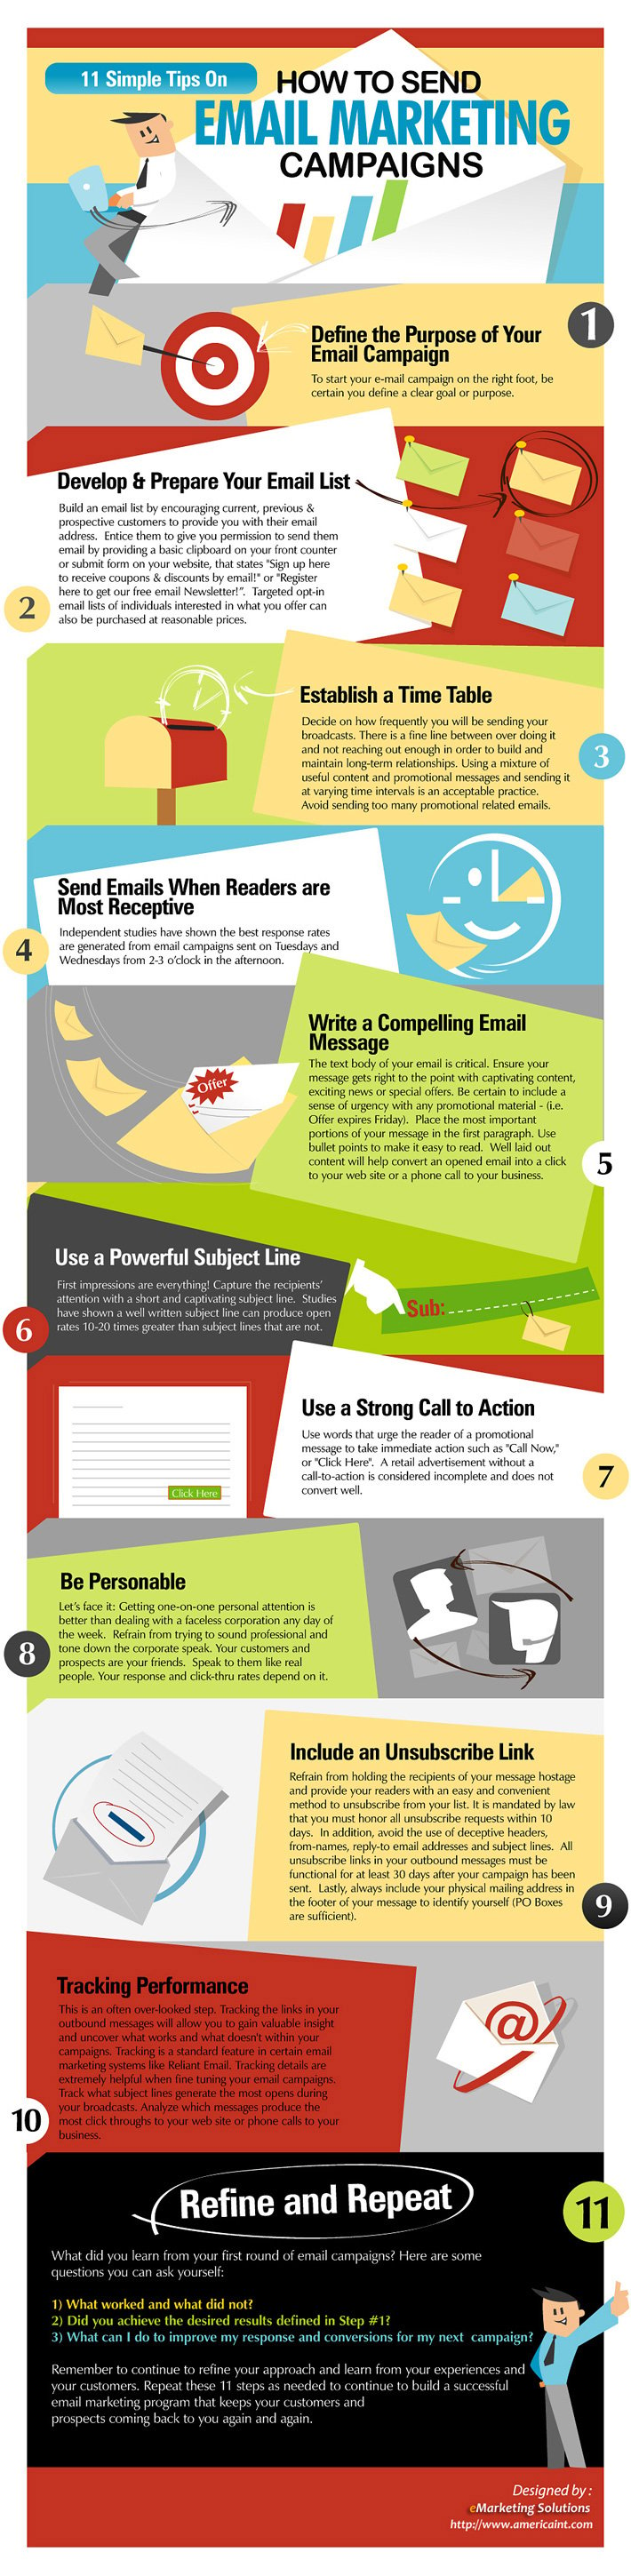 ultimate-email-marketing-guide-1